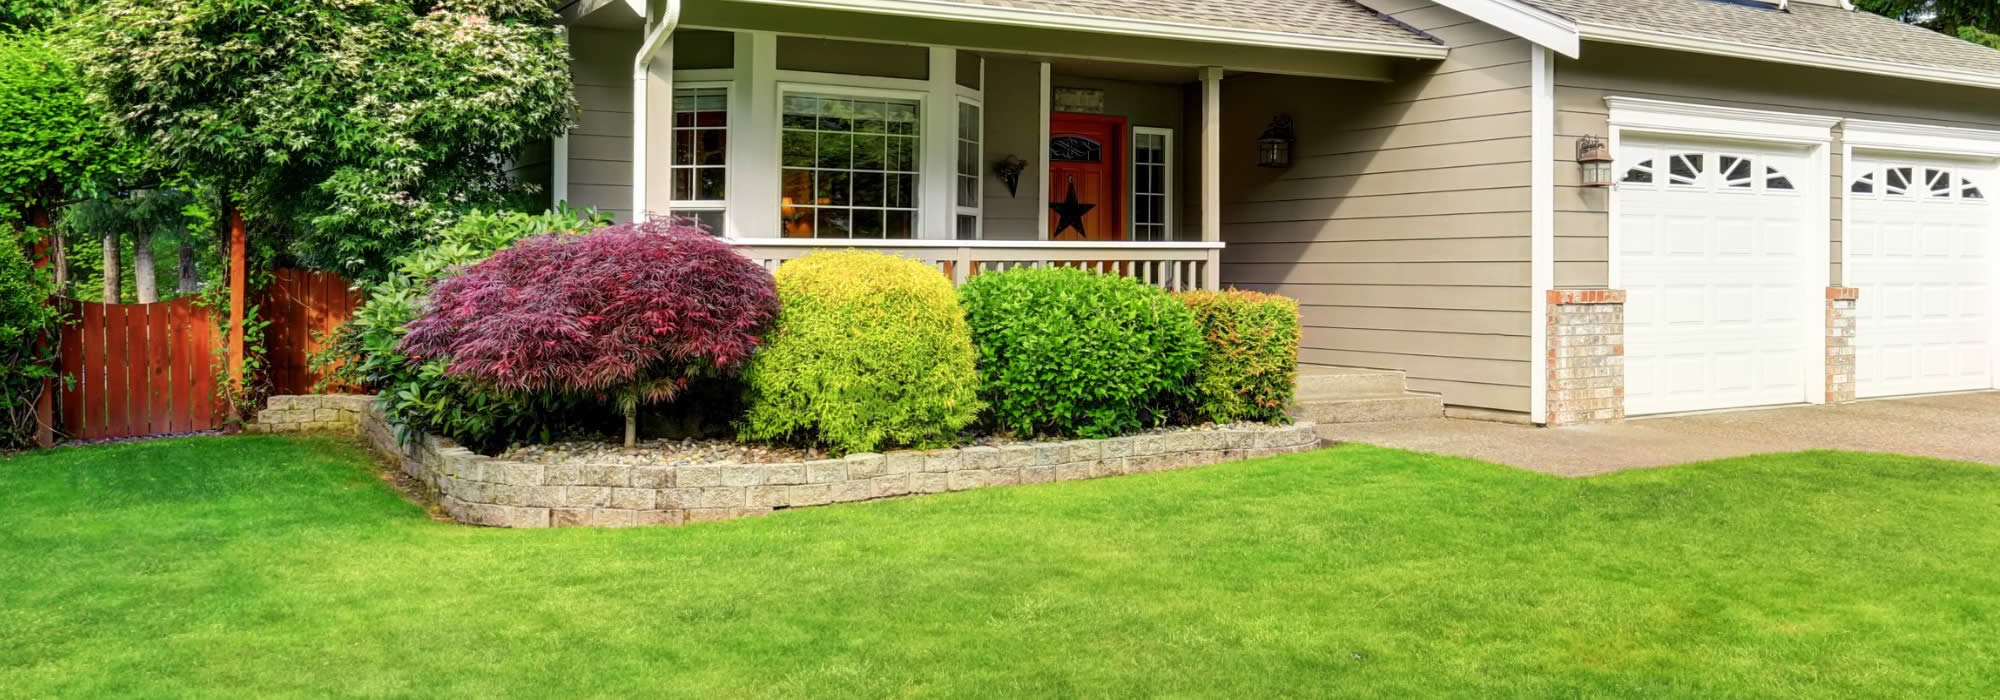 Landscaping Services in Fitchburg